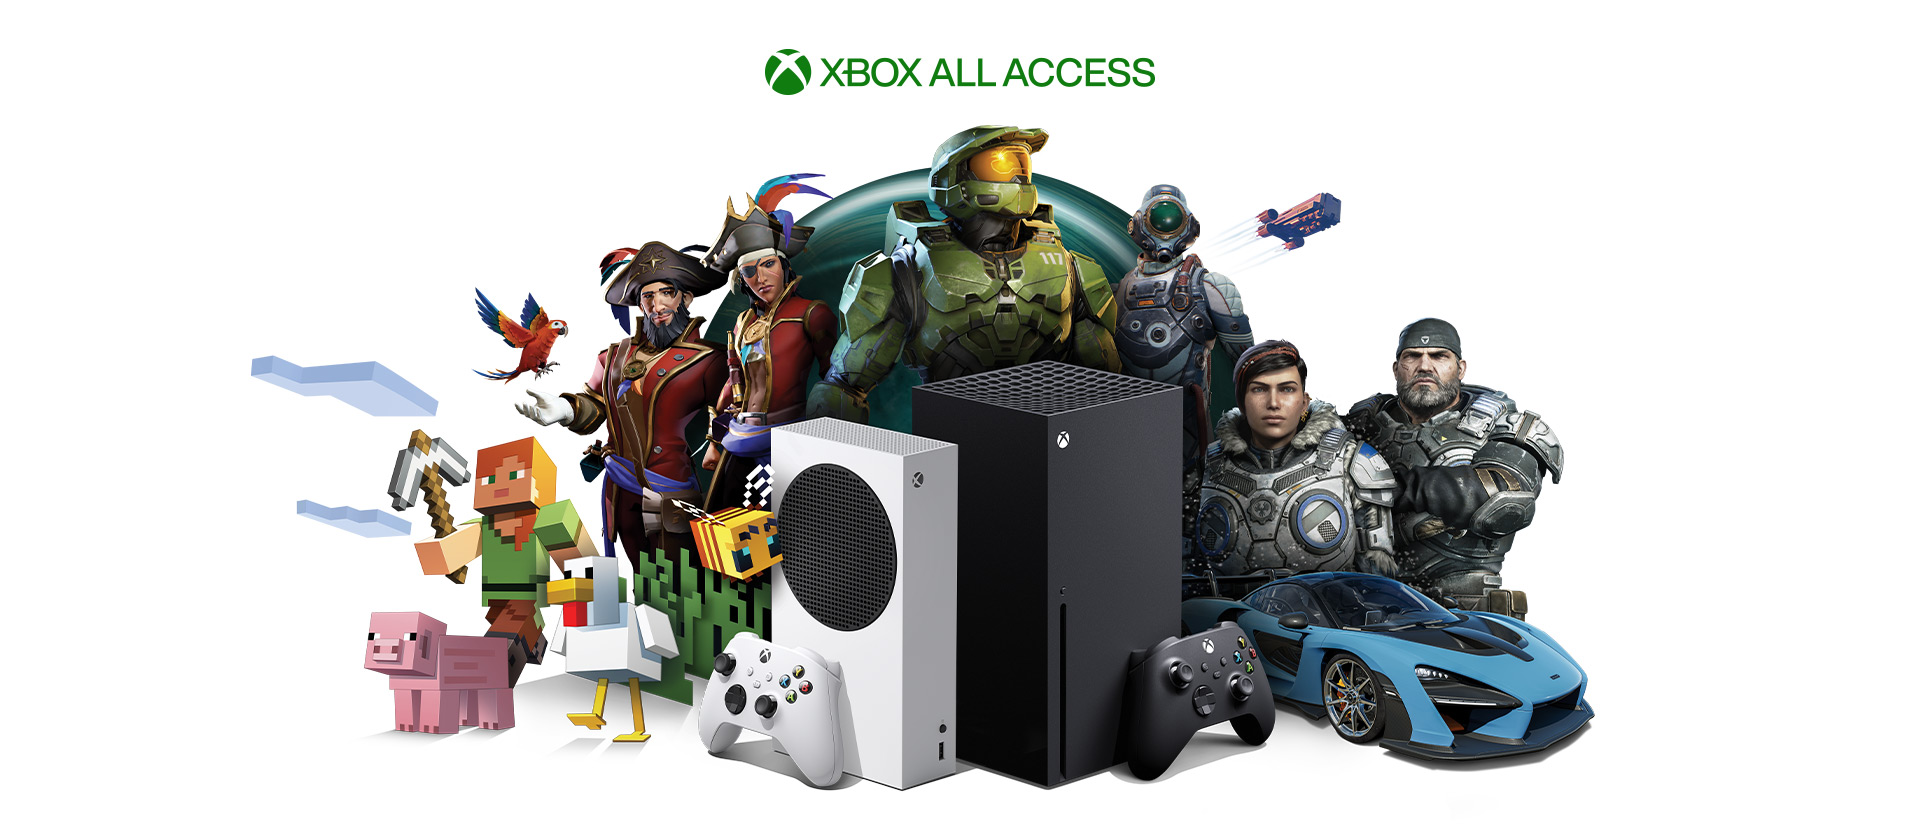 Get your first month for $1 when you join Xbox Game Pass Ultimate